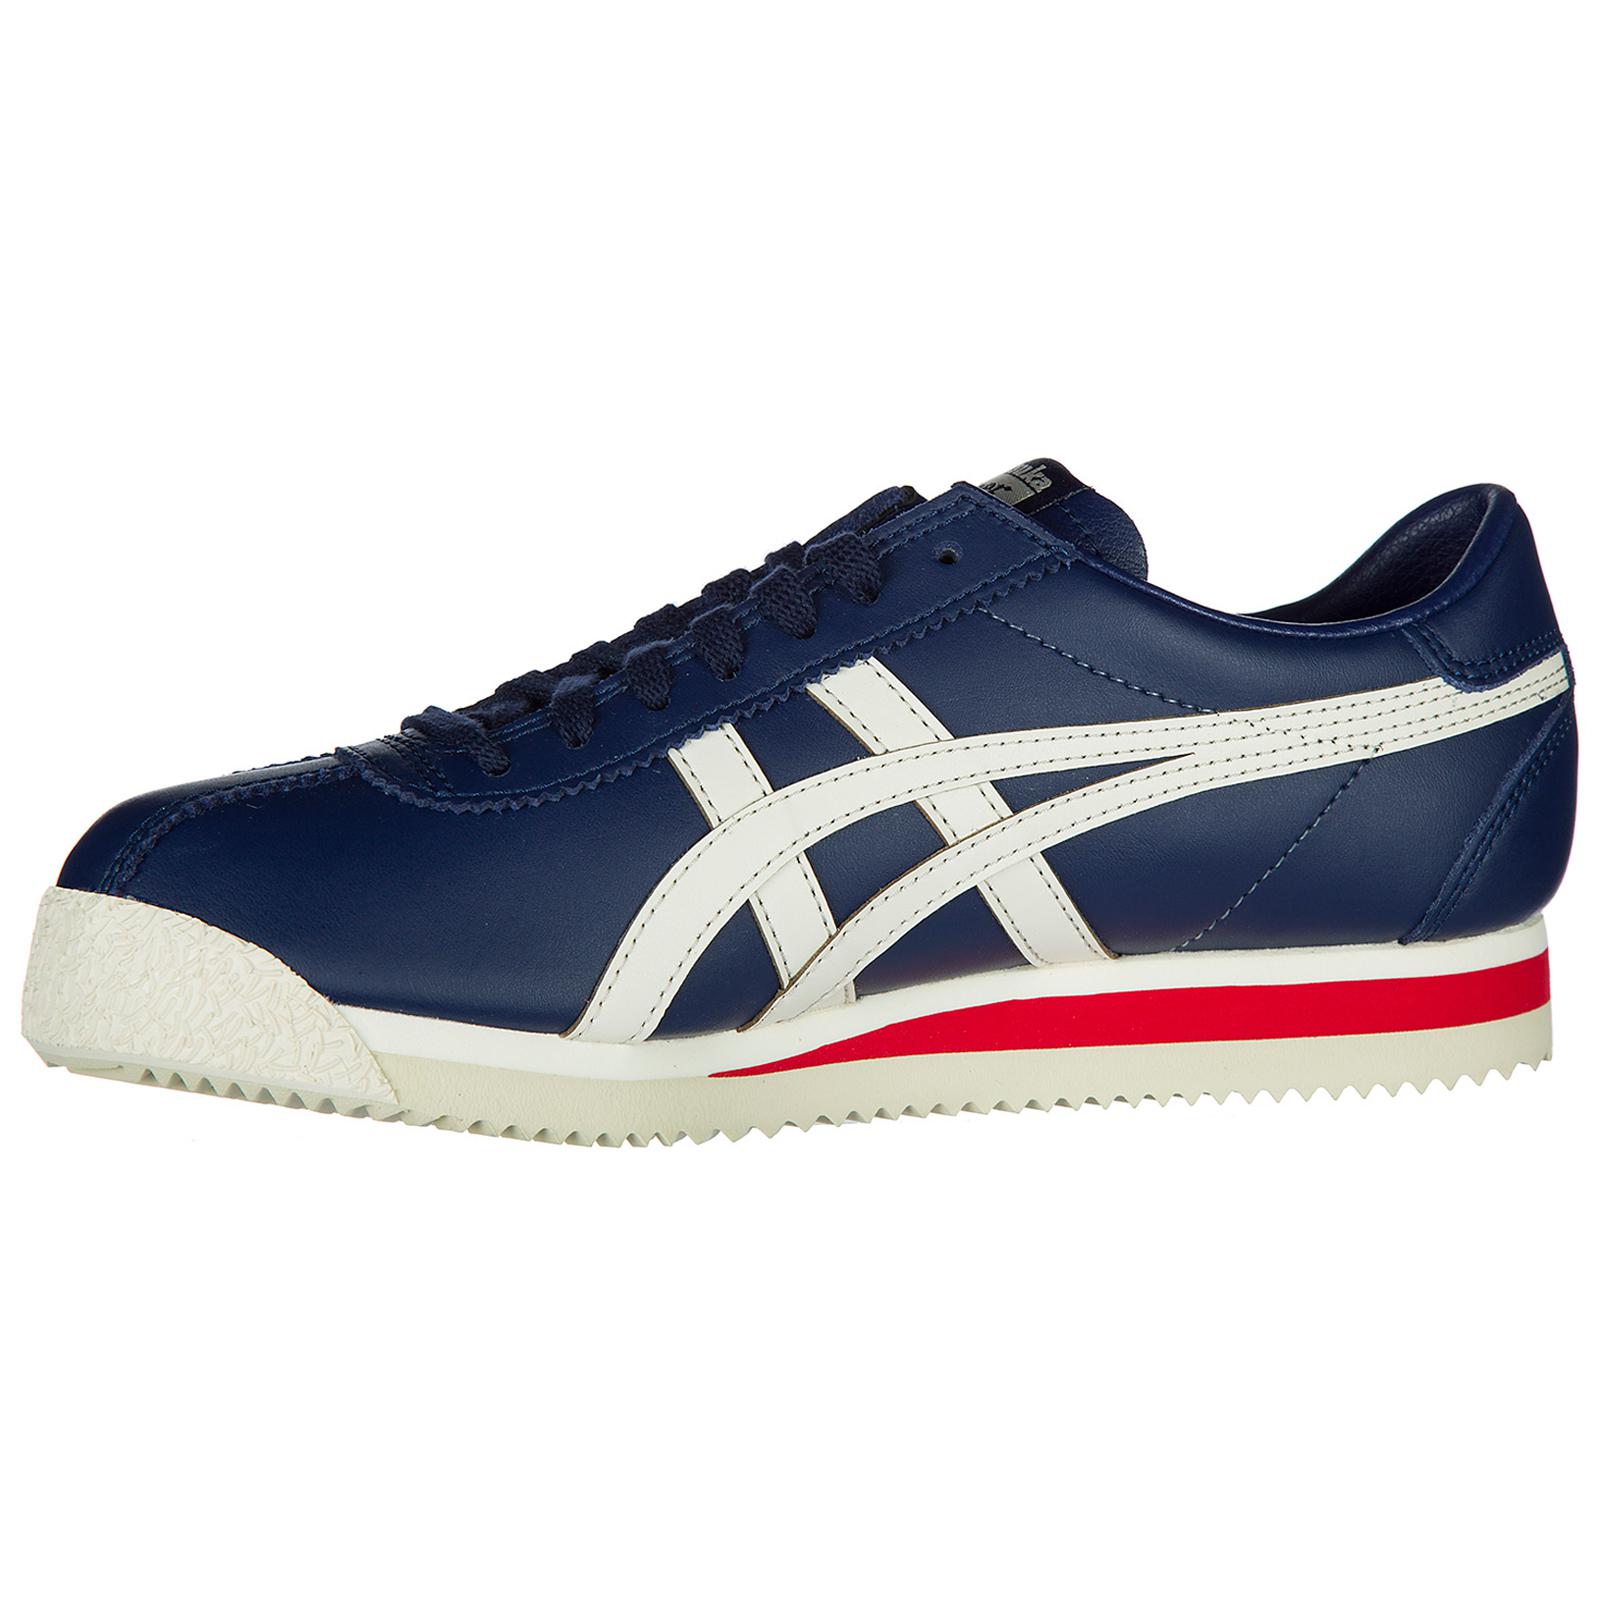 Onitsuka Tiger Shoes Leather Trainers Sneakers Tiger Corsair in Blue ...